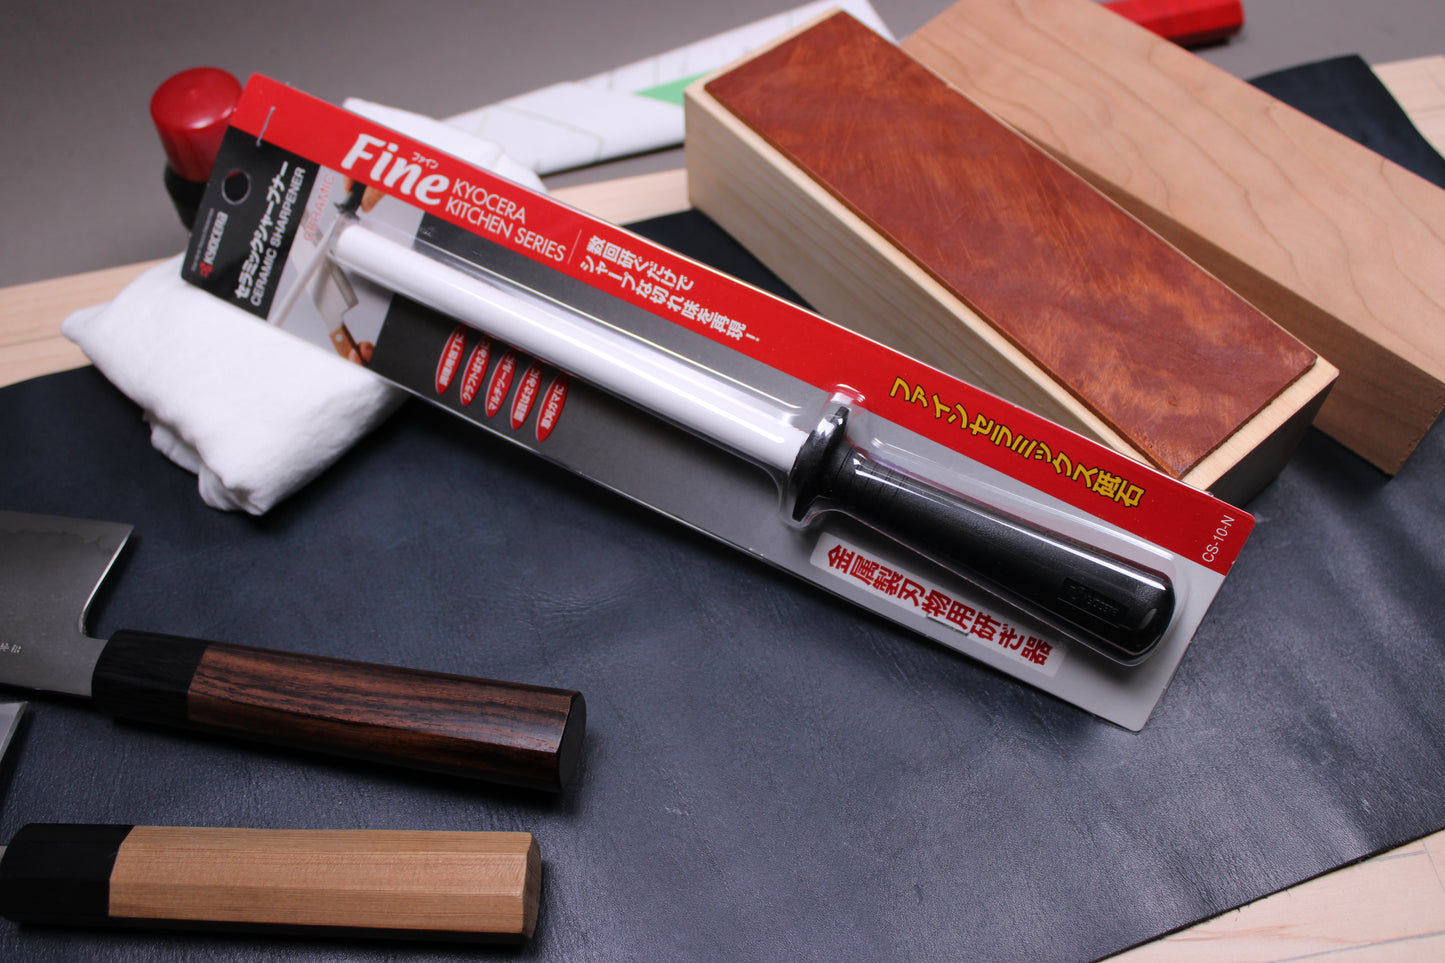  honing rod in package labeled fine kyocera kitchen series near leather knife strop and two japanese knives